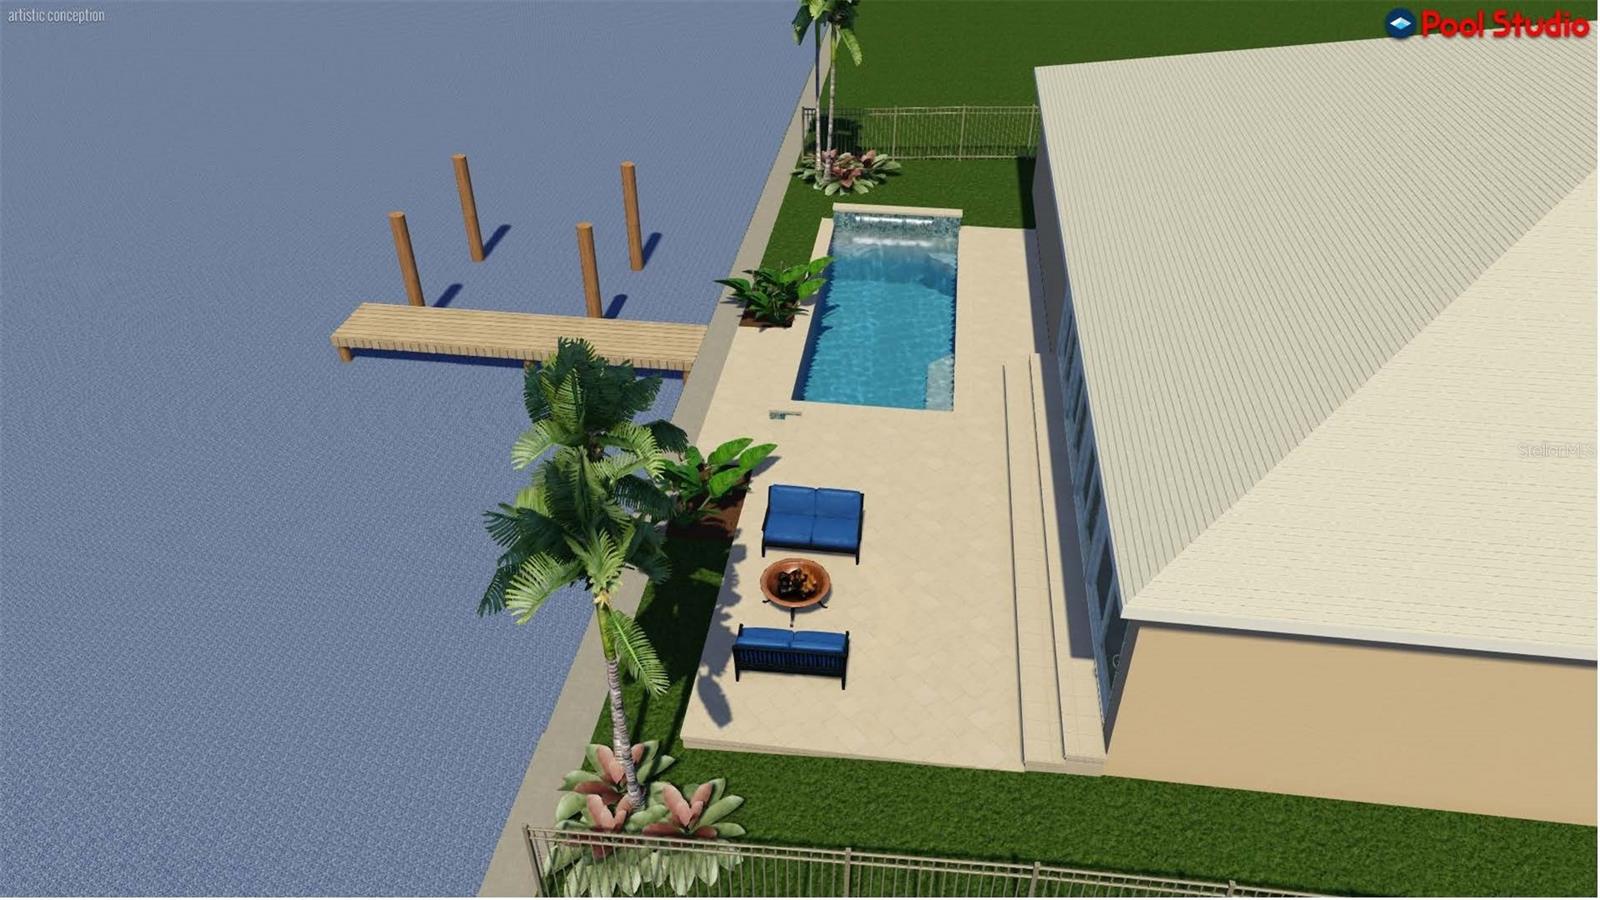 A pool can be built. This pool rendering was created by Atlantic Pools using the survey. (There are more drawings of a potential pool at the end of the photos. )